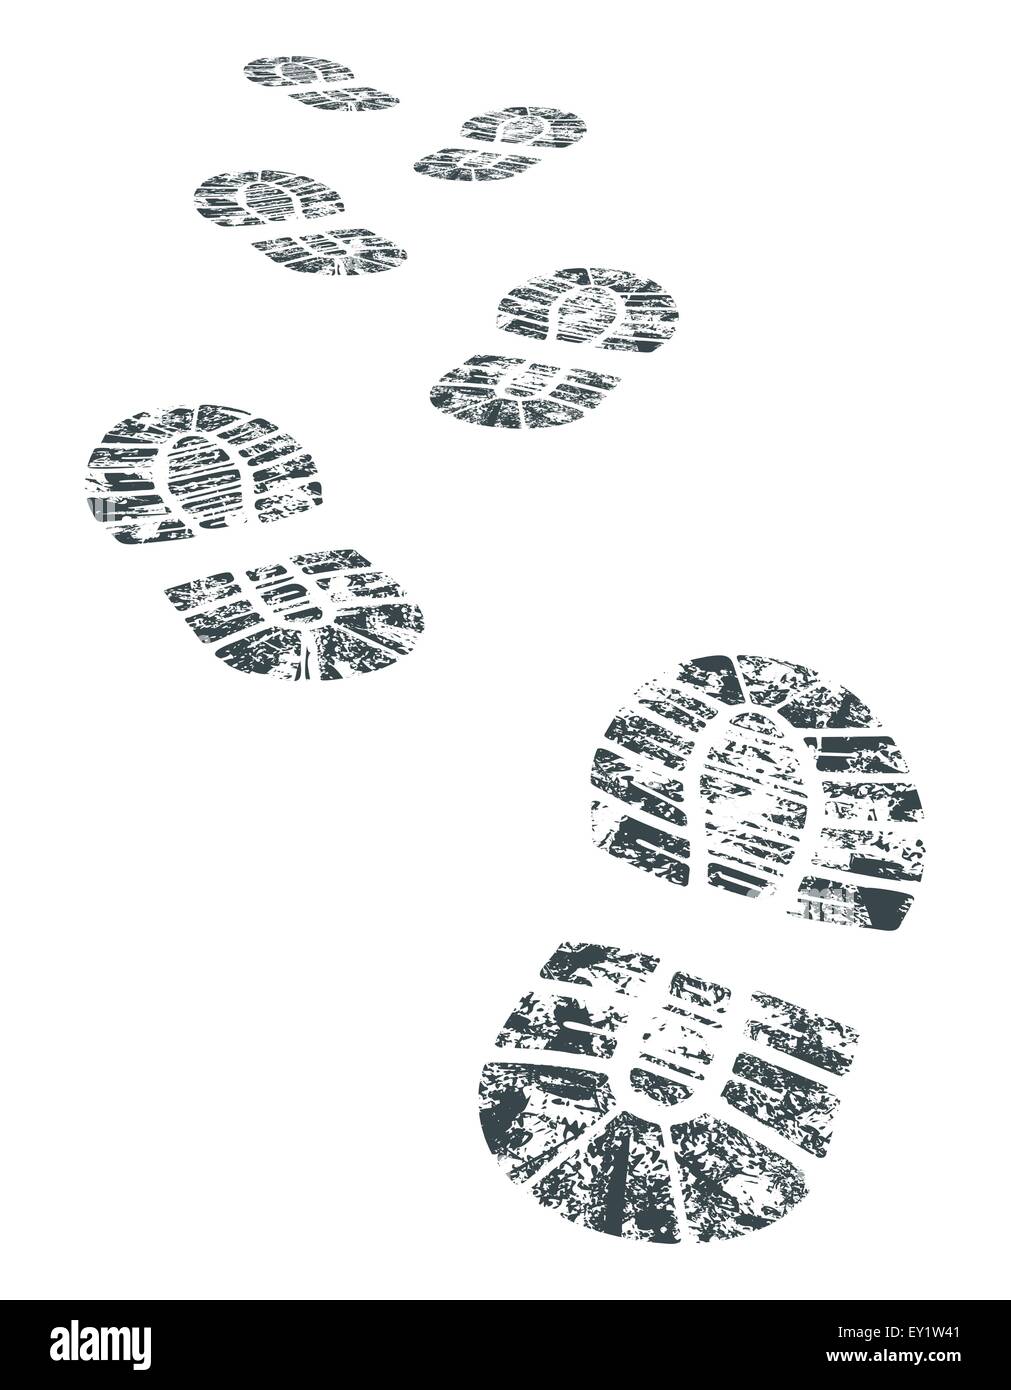 detailed black and white bootprint - vector illustration Stock Vector